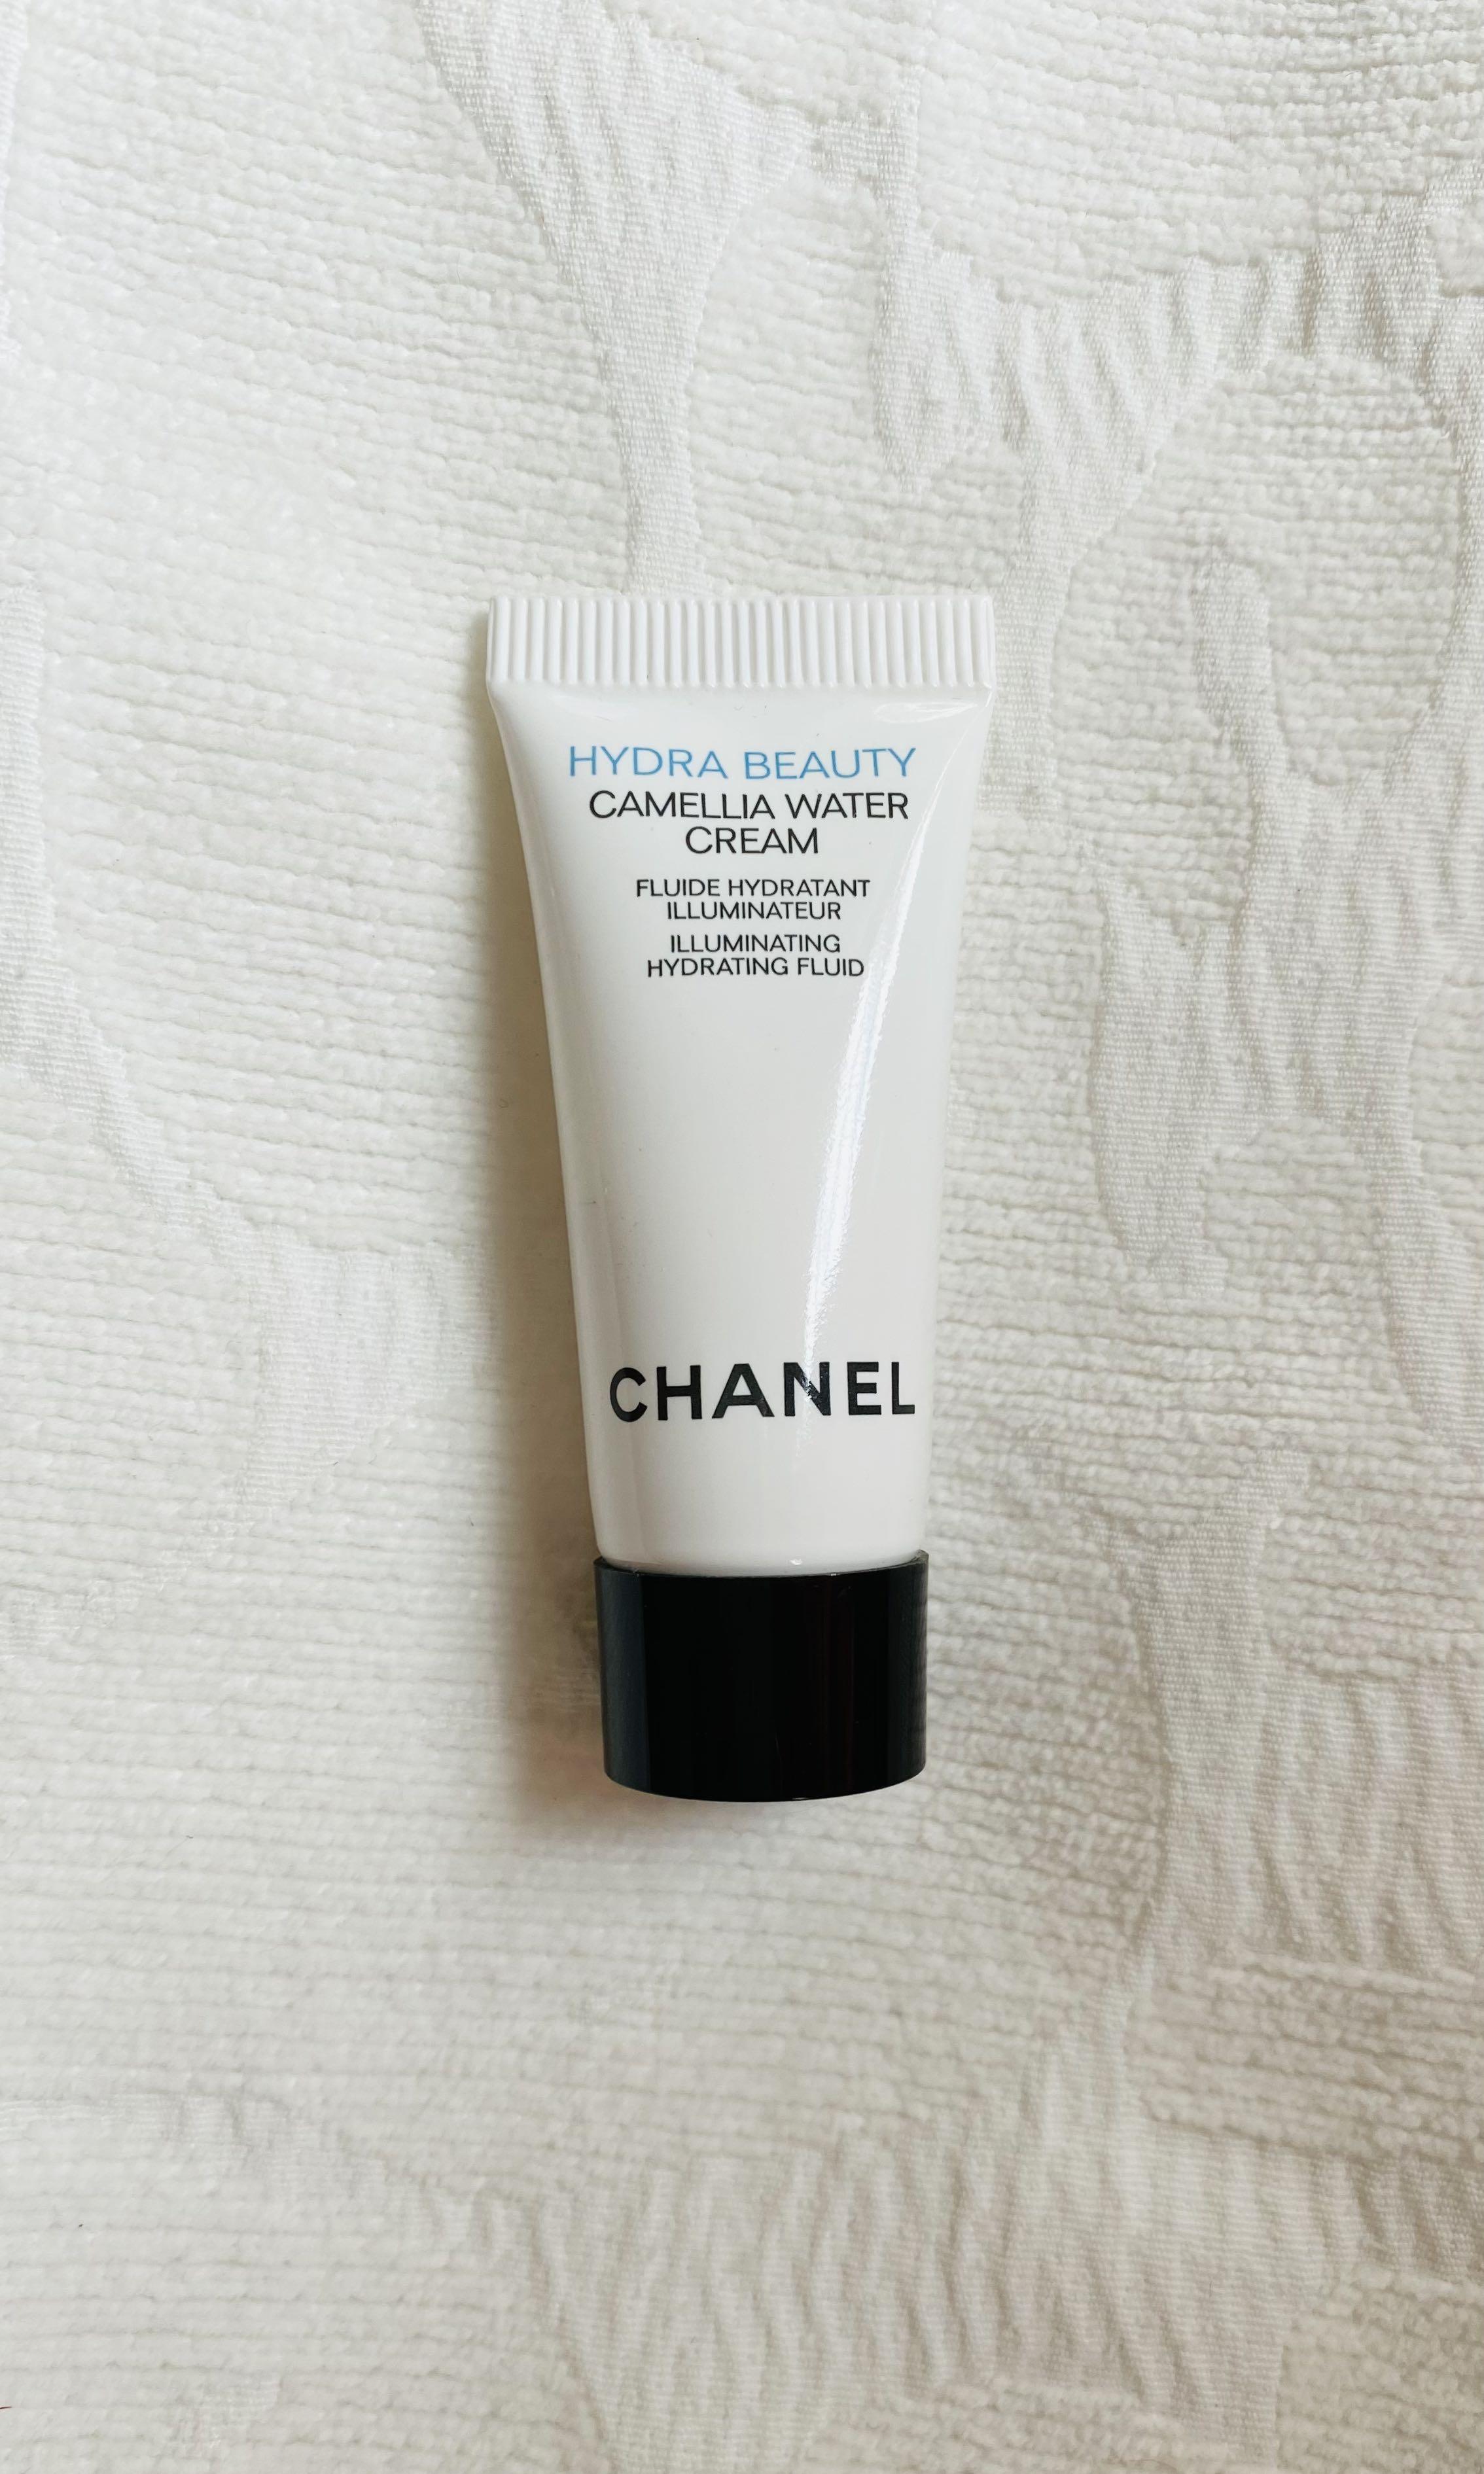 CHANEL HYDRA BEAUTY Camellia Water Cream 2019 Review  Chic moeY